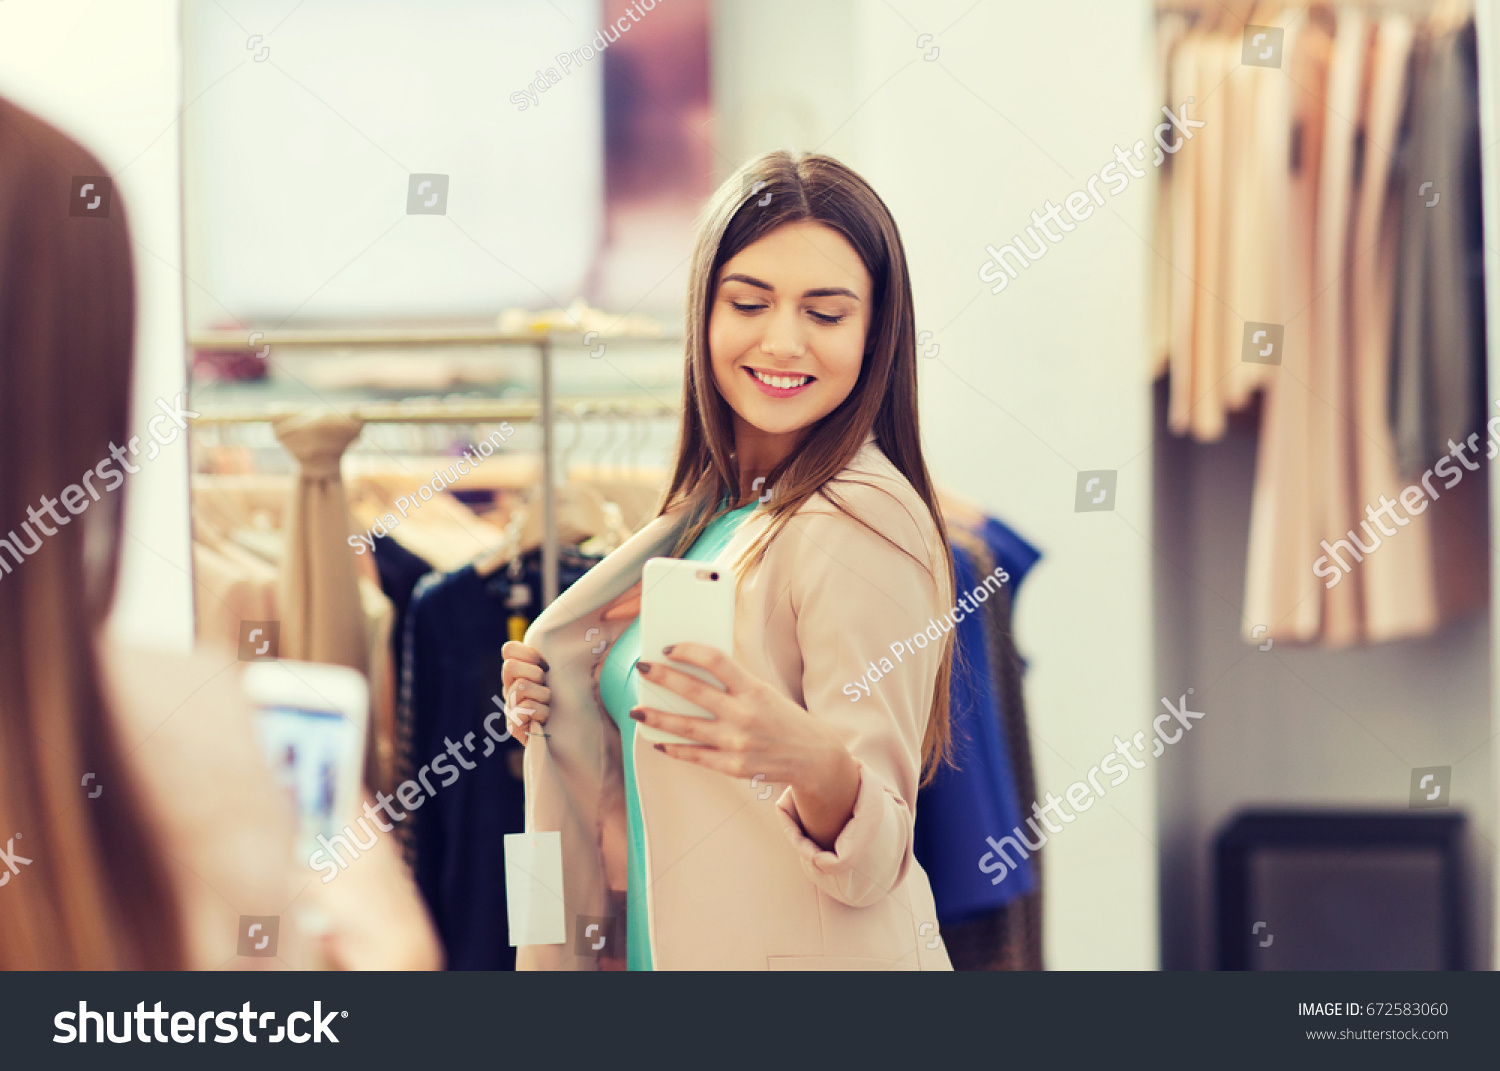 Shopping Fashion Style Technology People Concept Stock Photo 672583060 ...